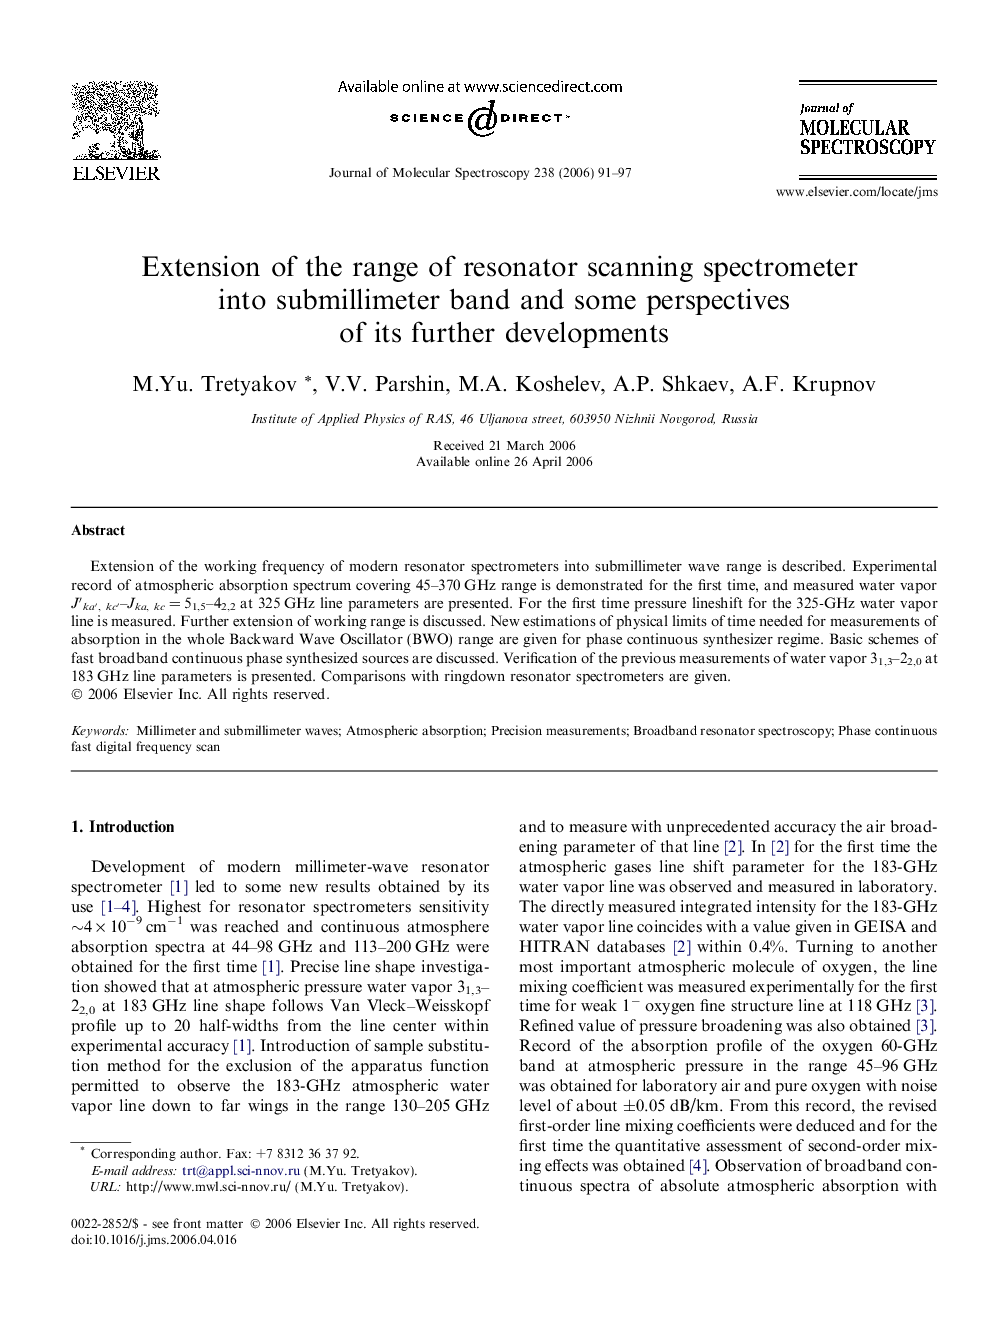 Extension of the range of resonator scanning spectrometer into submillimeter band and some perspectives of its further developments